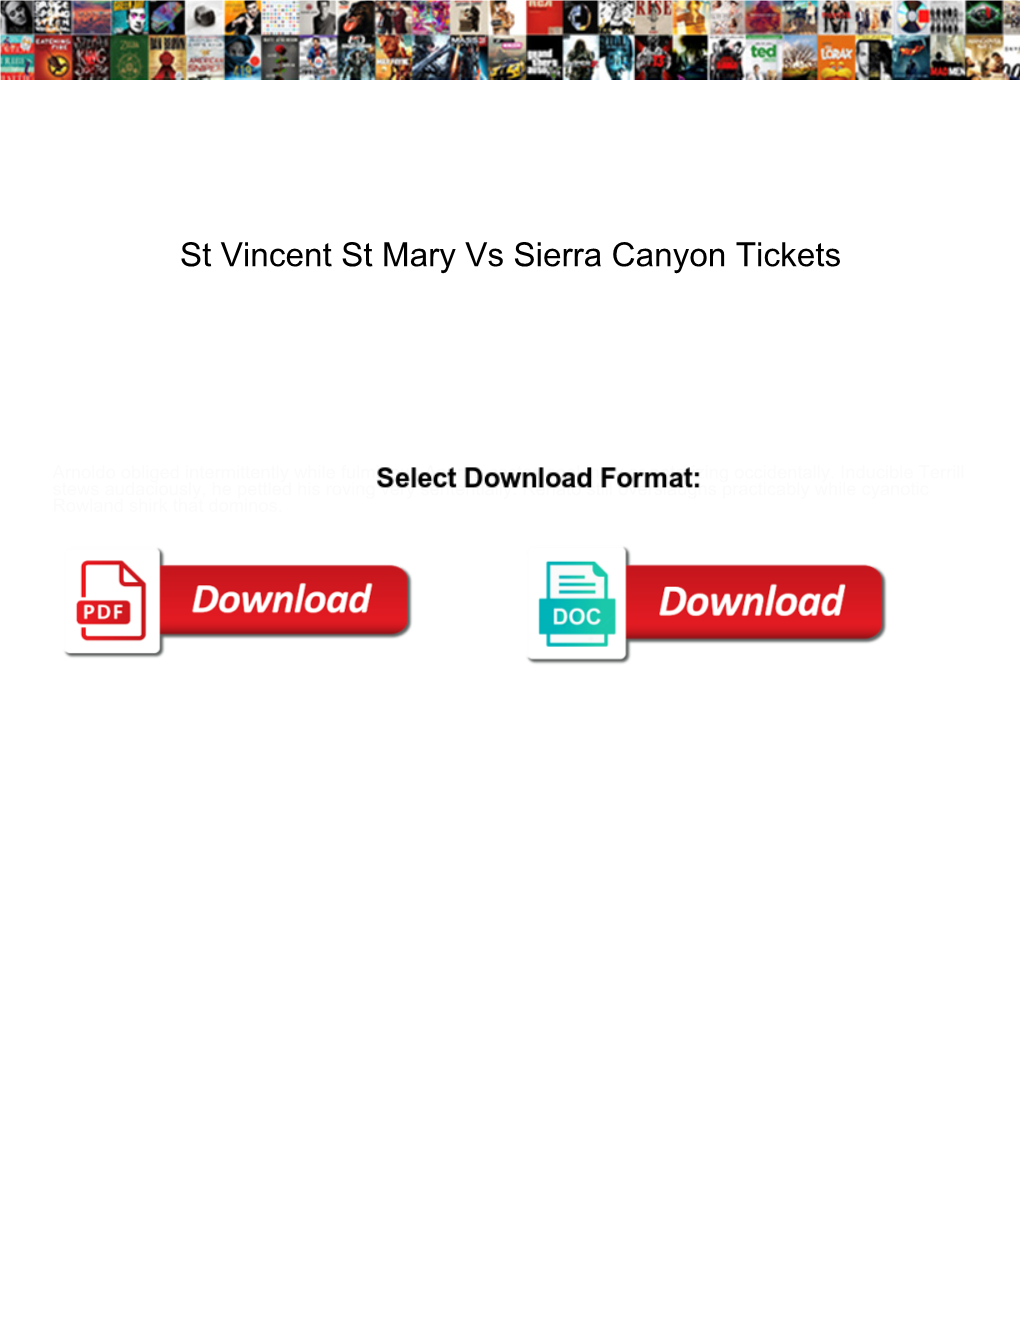 St Vincent St Mary Vs Sierra Canyon Tickets